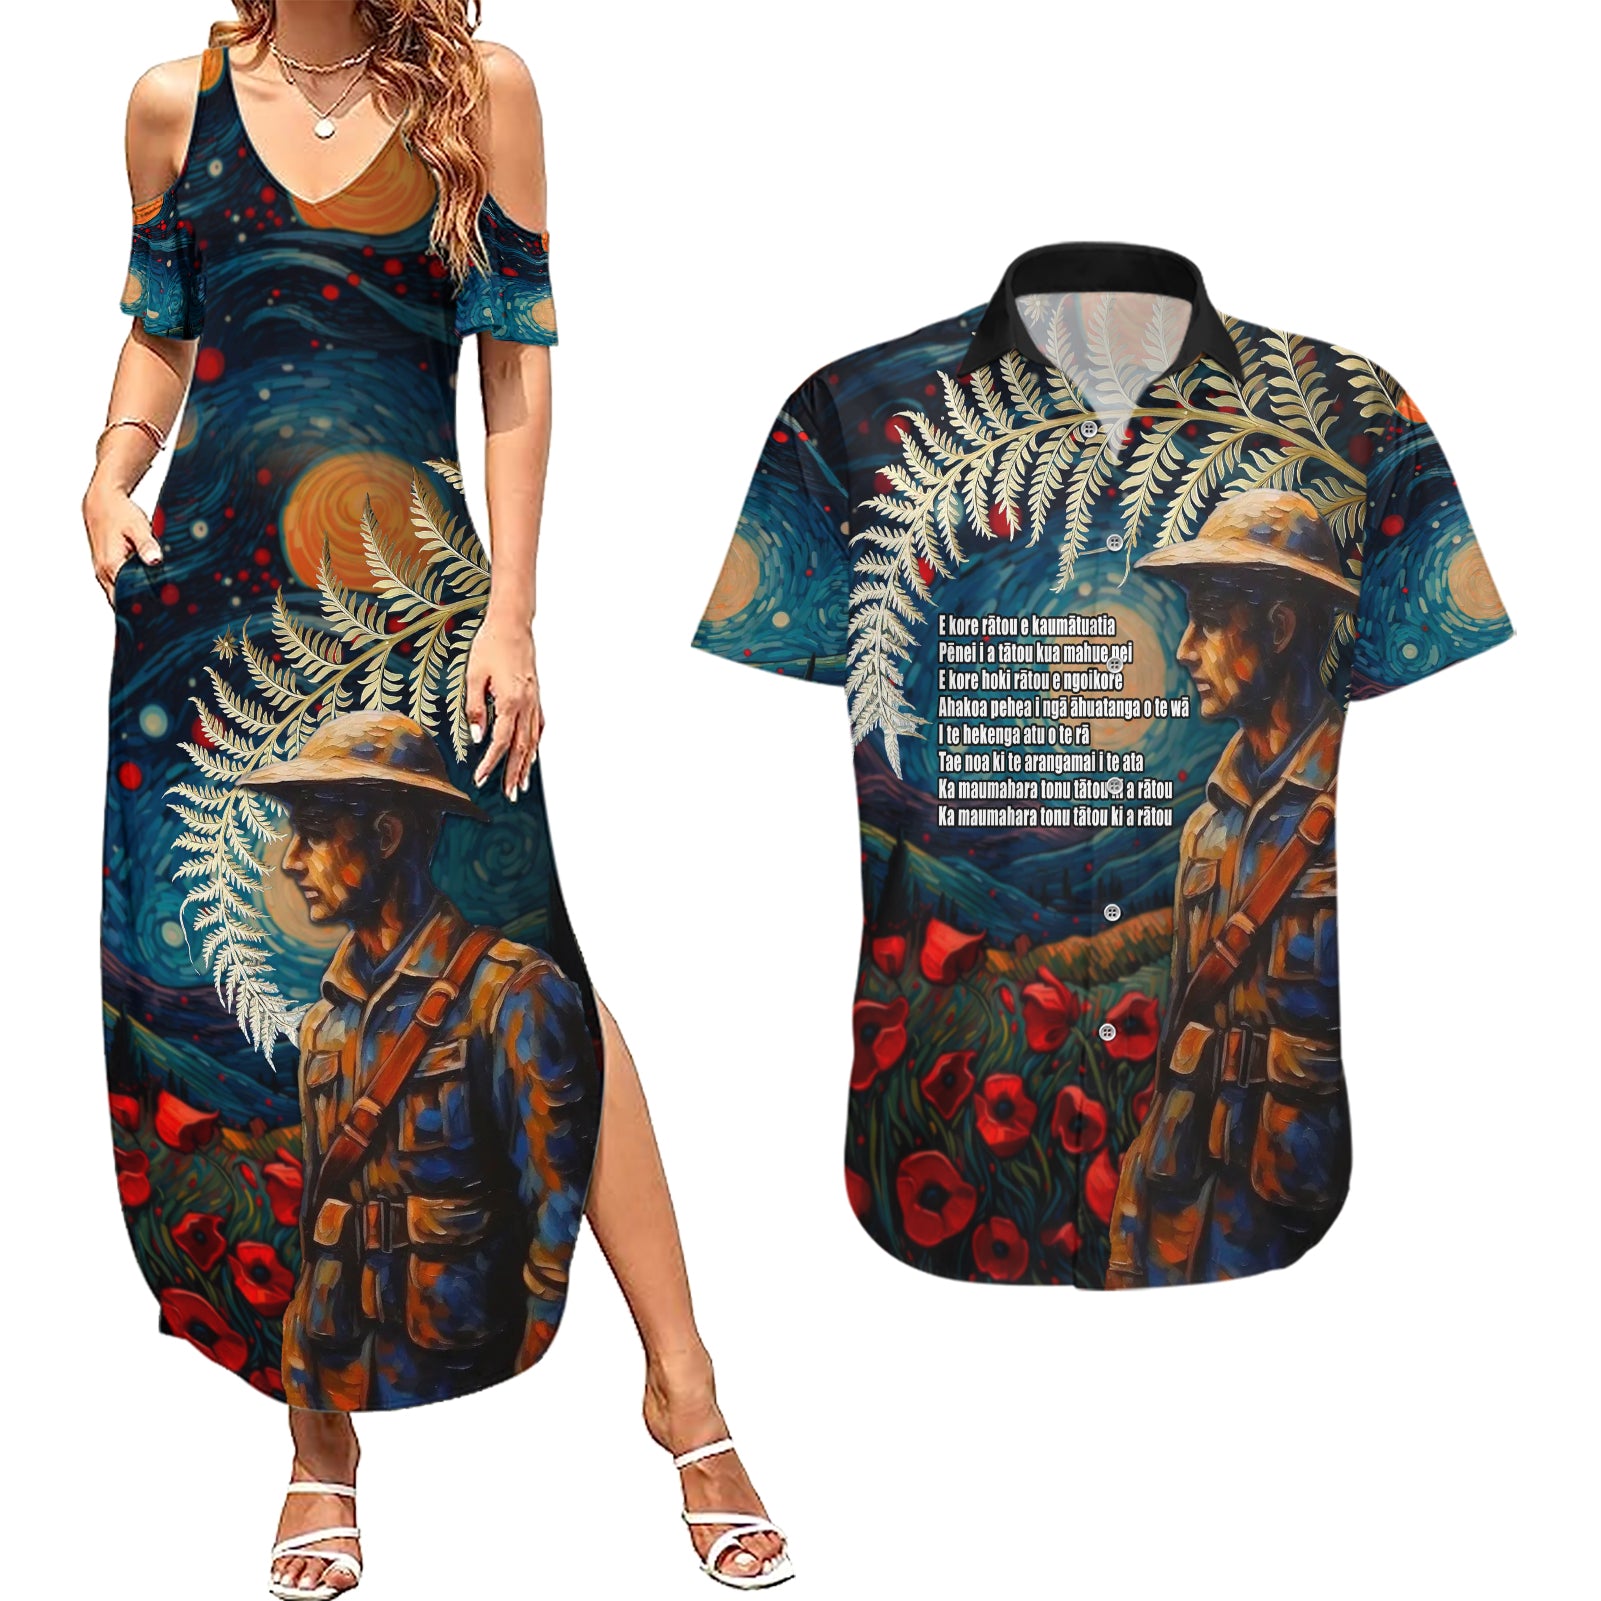 New Zealand Soldier ANZAC Day Couples Matching Summer Maxi Dress and Hawaiian Shirt Silver Fern Starry Night Style LT03 Blue - Polynesian Pride